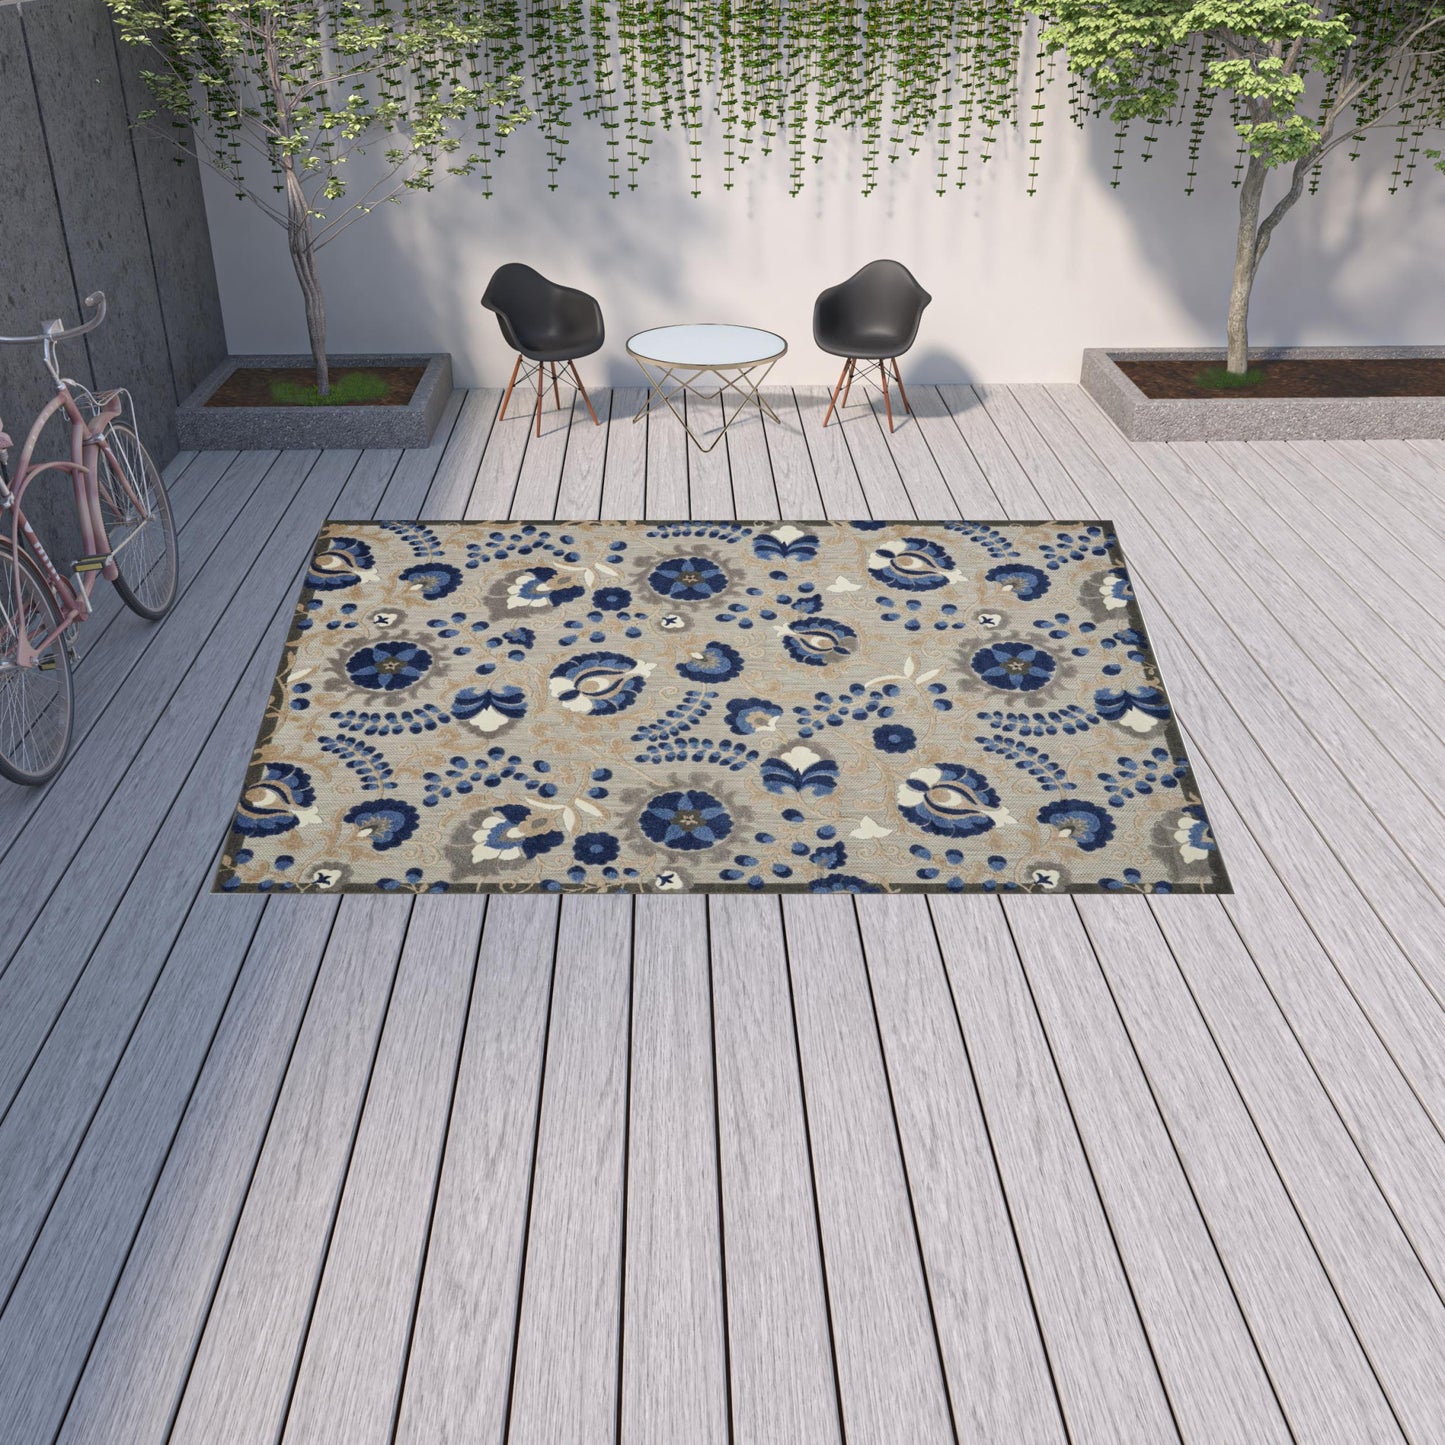 10' X 13' Natural And Blue Toile Non Skid Indoor Outdoor Area Rug